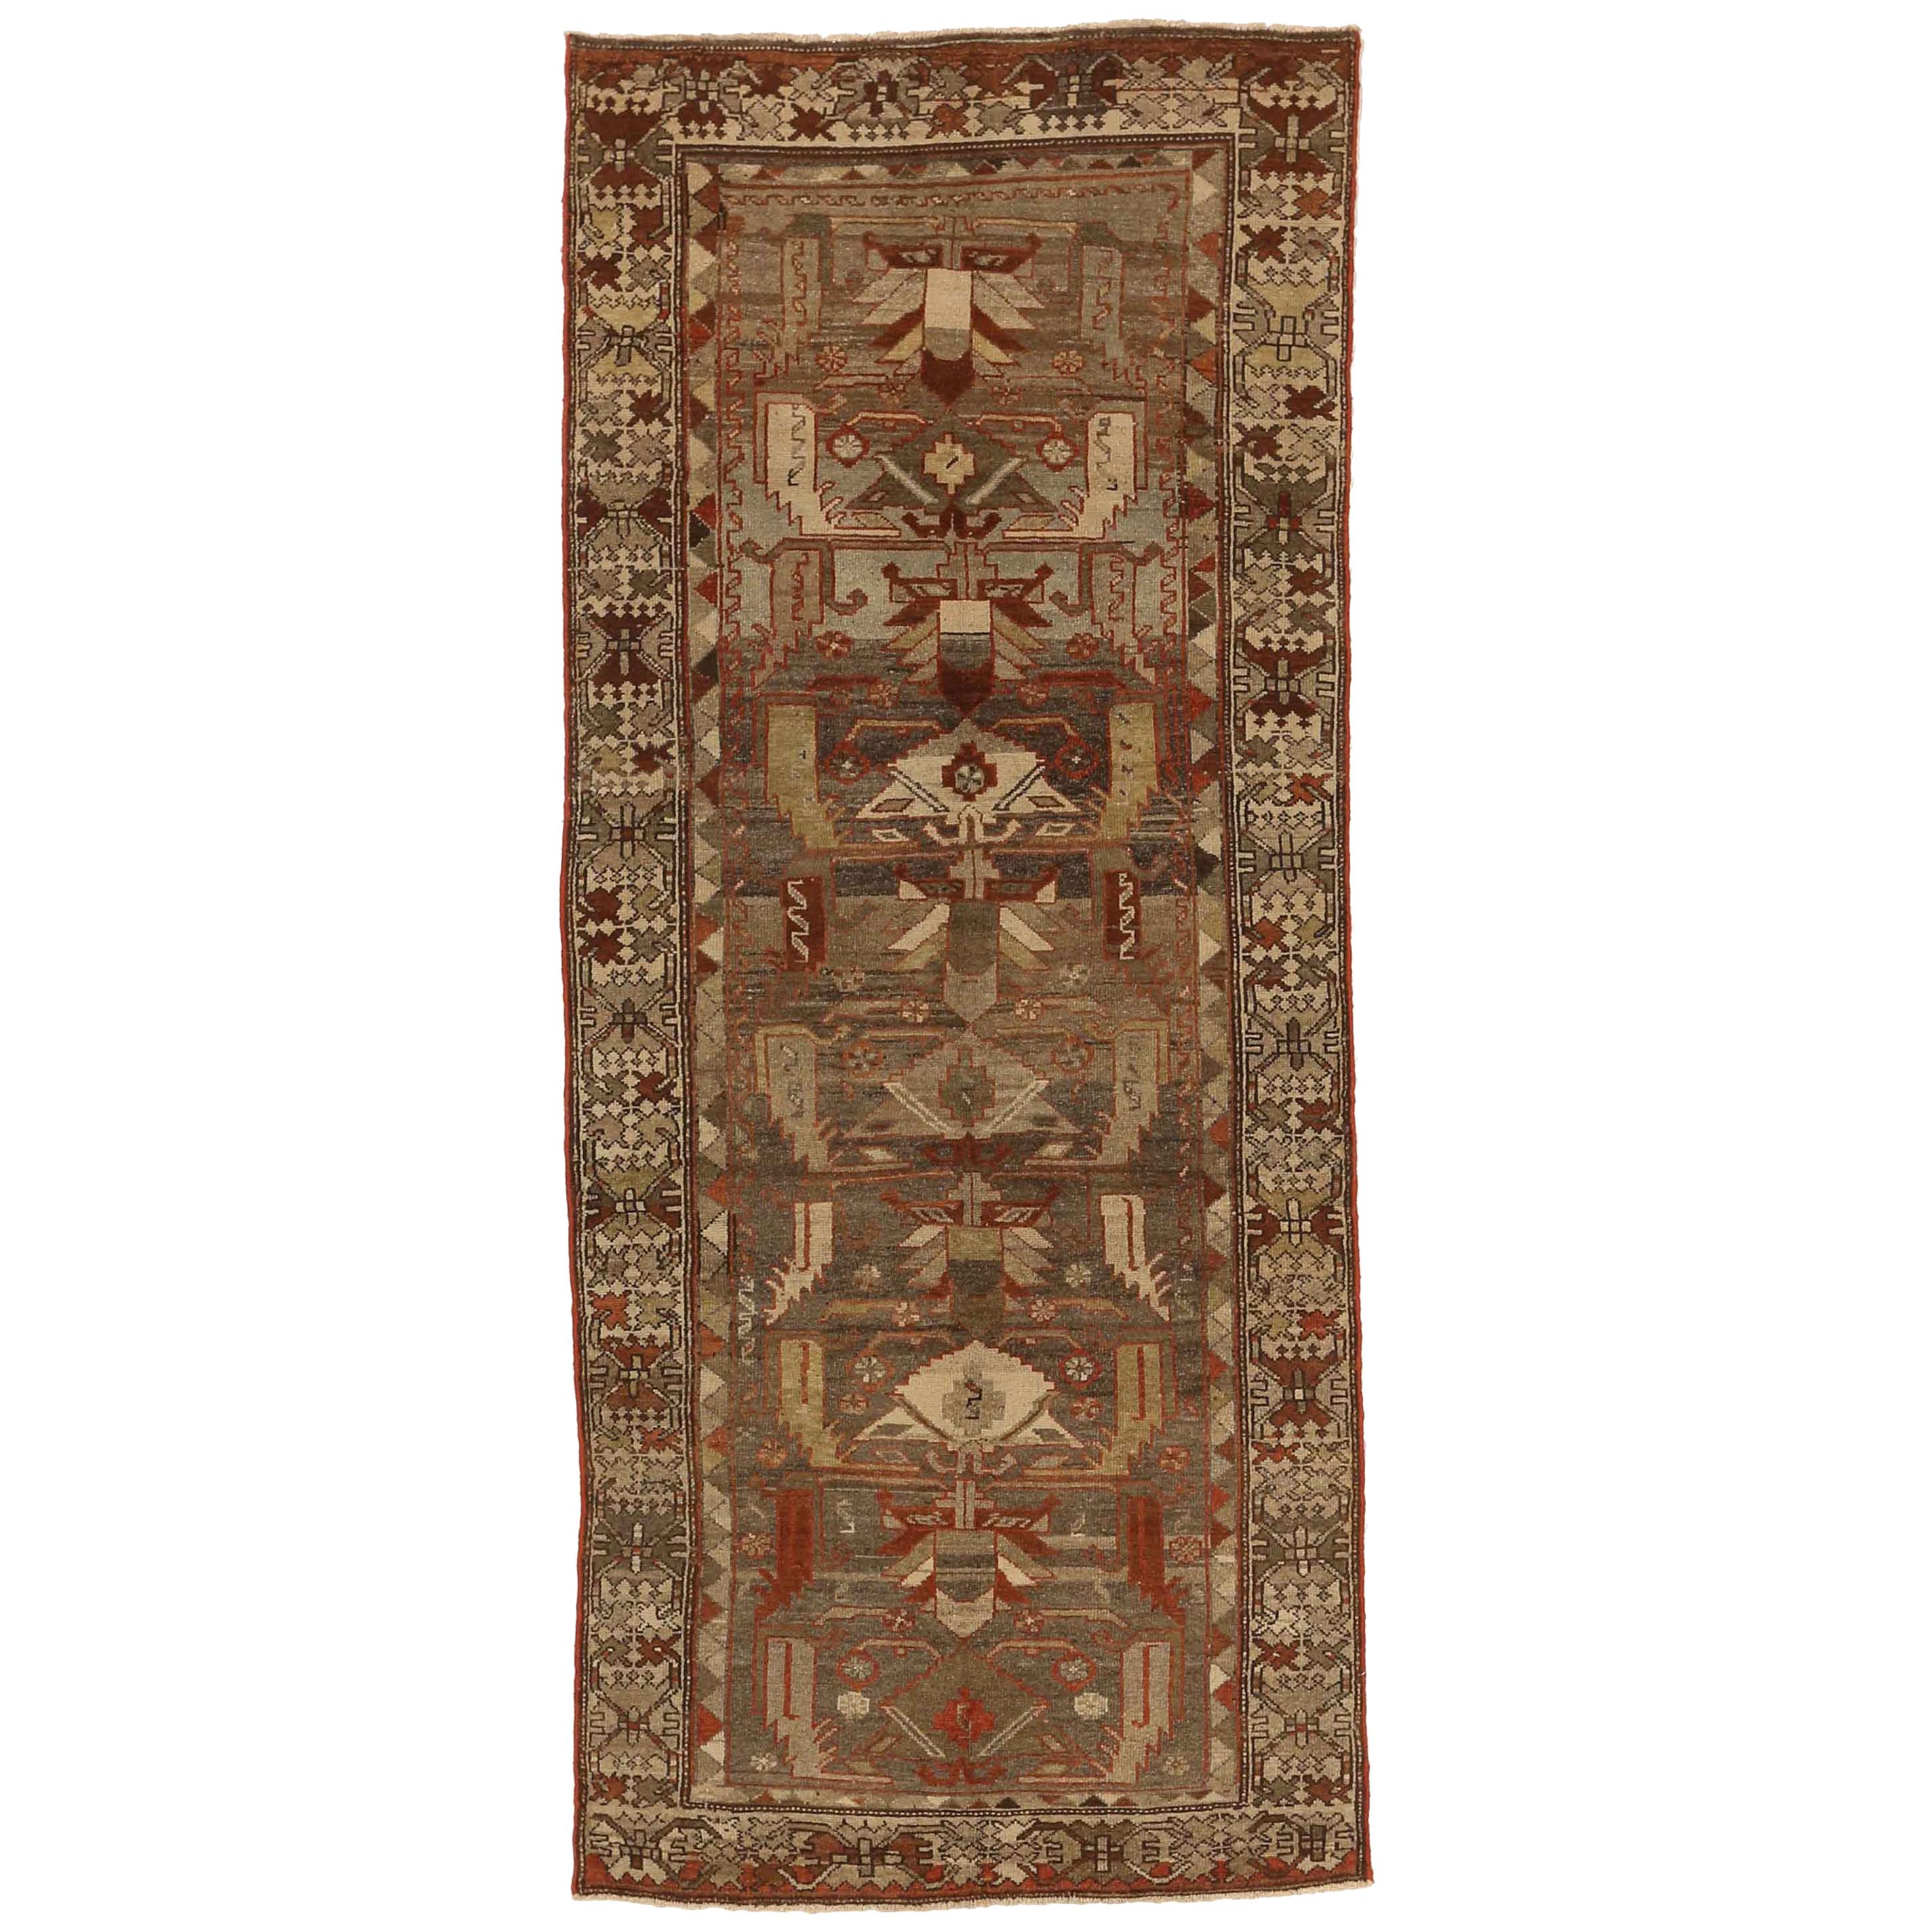 1930s Antique Persian Rug Zanjan Style With Rich Tribal and Geometric Designs